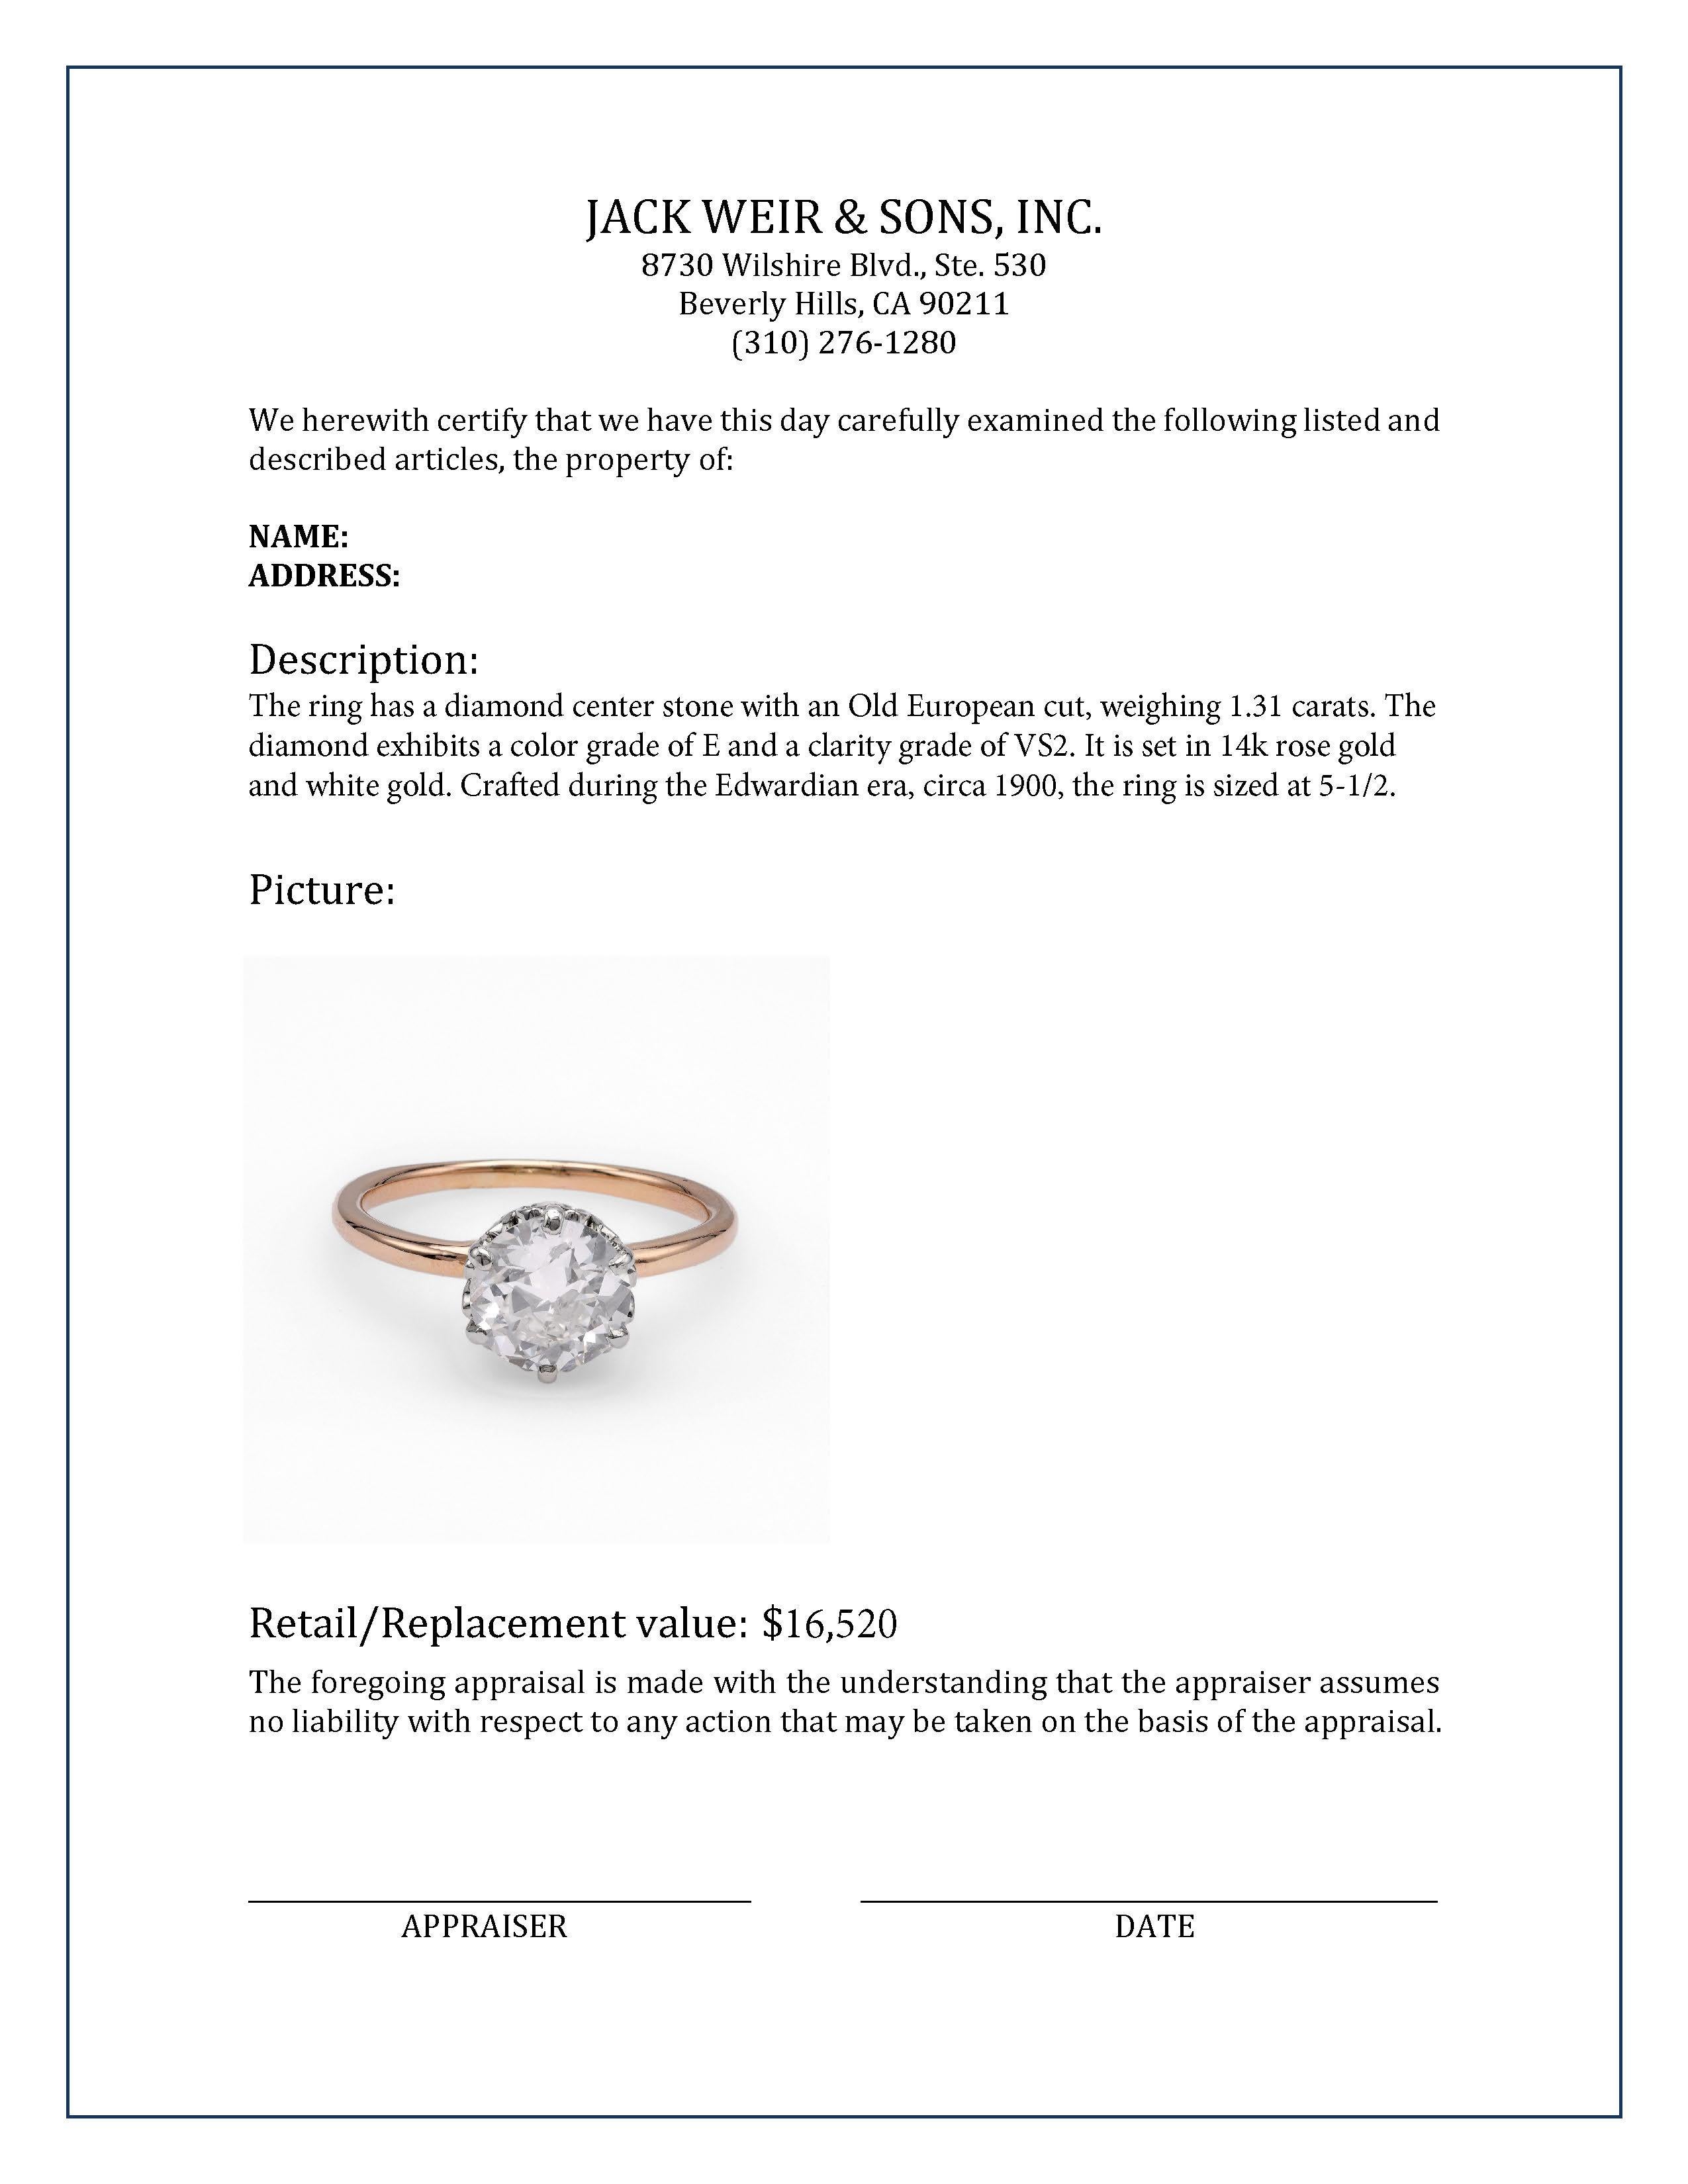 Certificate: GIA
Center Stone: Diamond
Cut: Old European
Weight: 1.31 Carat
Color: E
Clarity: VS2
Metal: 14k rose gold and white gold
Era: Edwardian
Circa: 1900
Size: 5-1/2 and can be resized 
Gram weight: 2.4 
 
Elevate your elegance with this